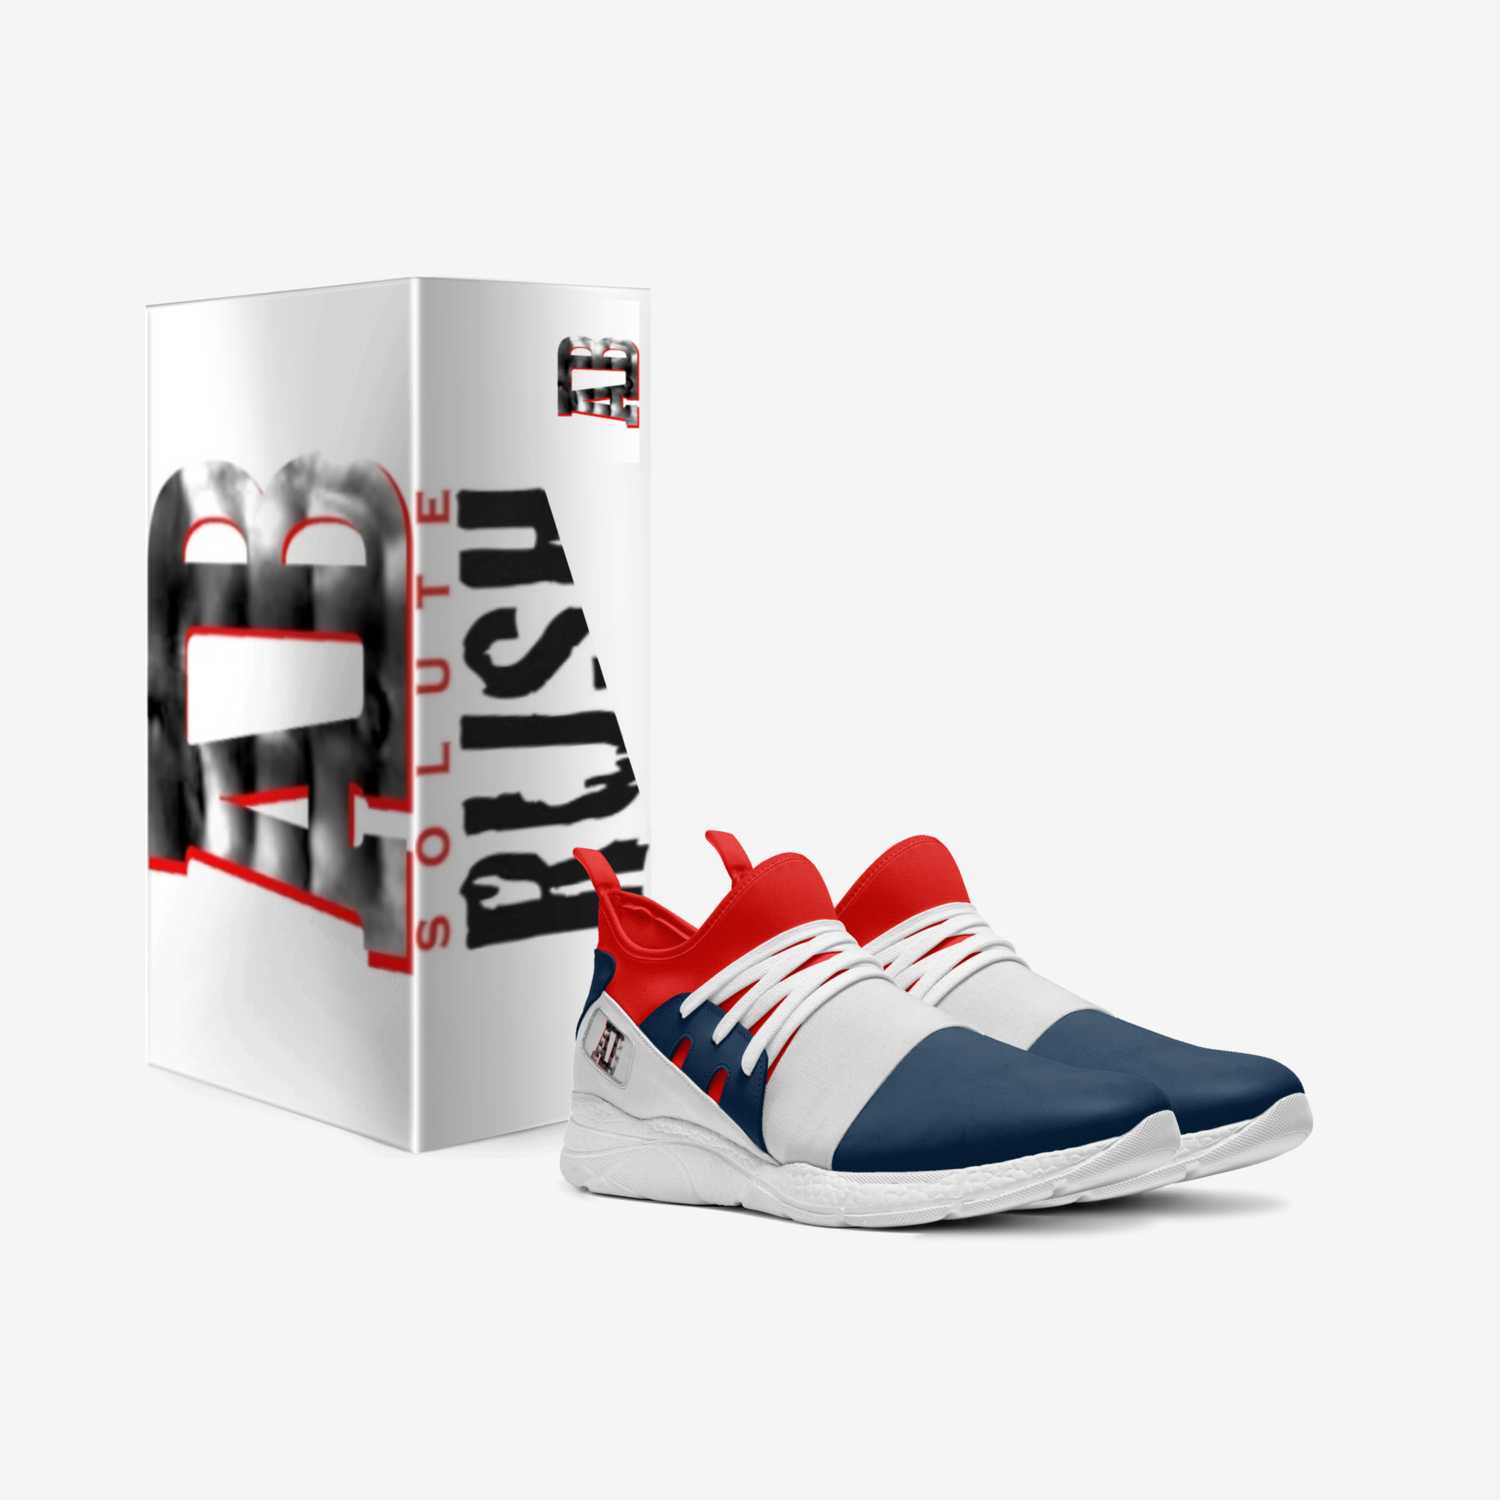 3D RUSH: USA custom made in Italy shoes by Andrew Scott | Box view